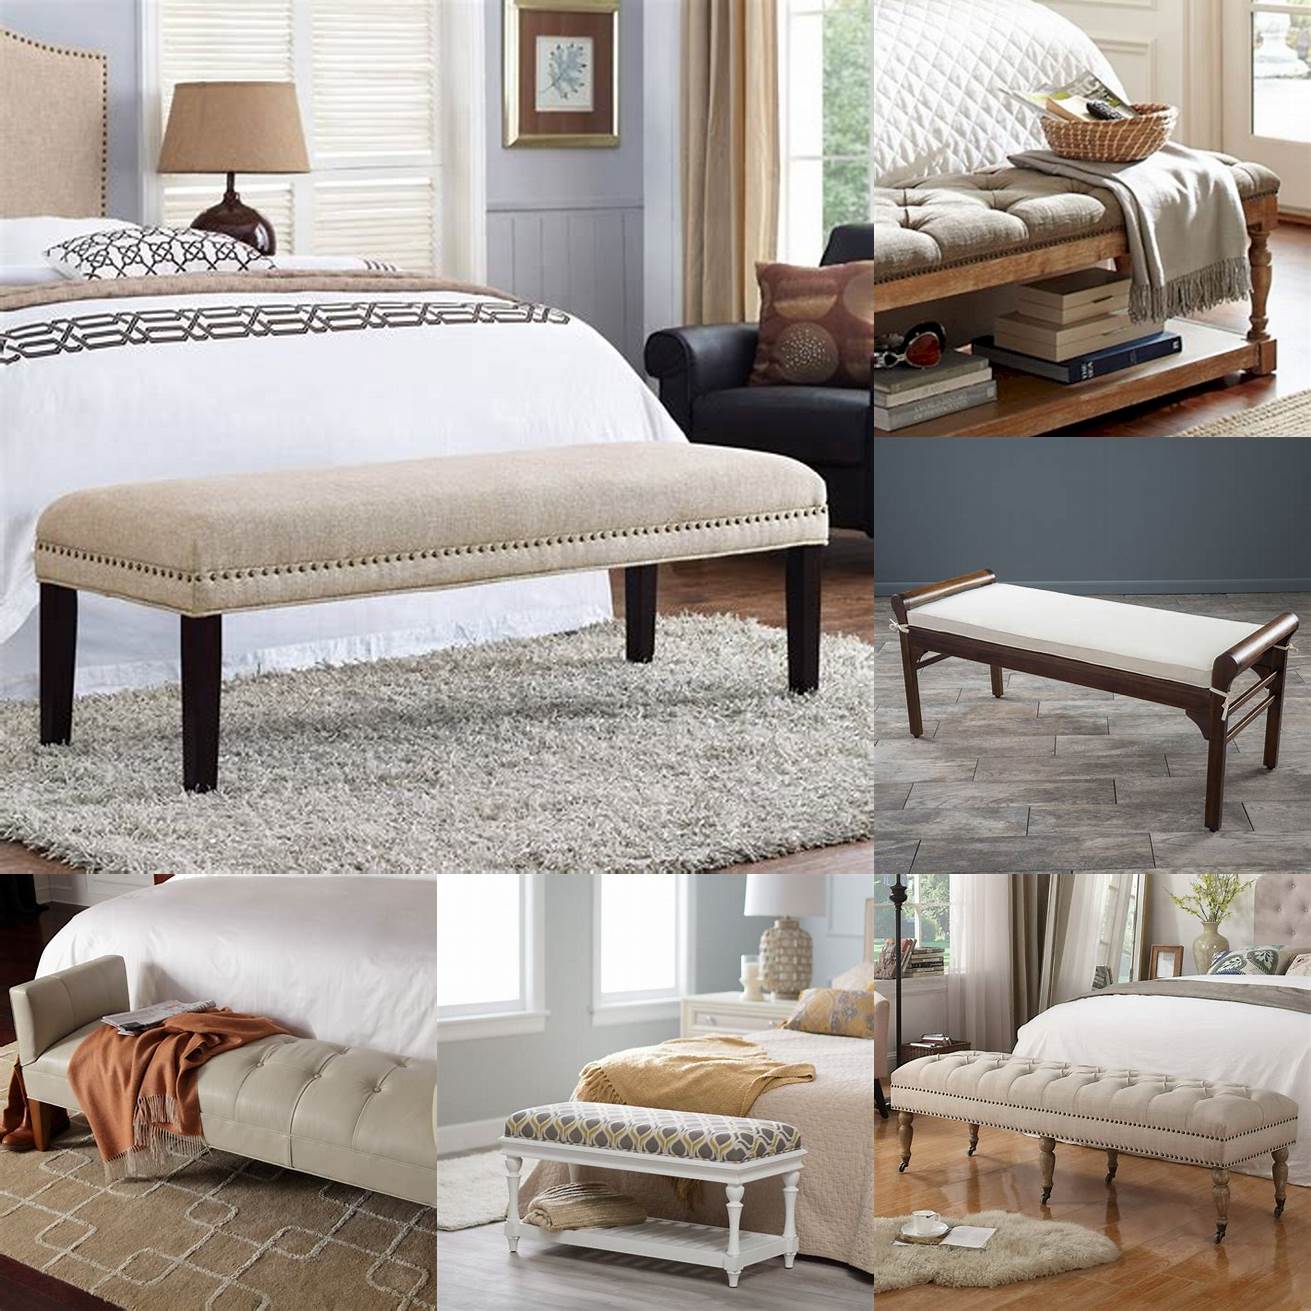 Functionality A foot of bed bench can serve multiple purposes and adapt to your changing needs